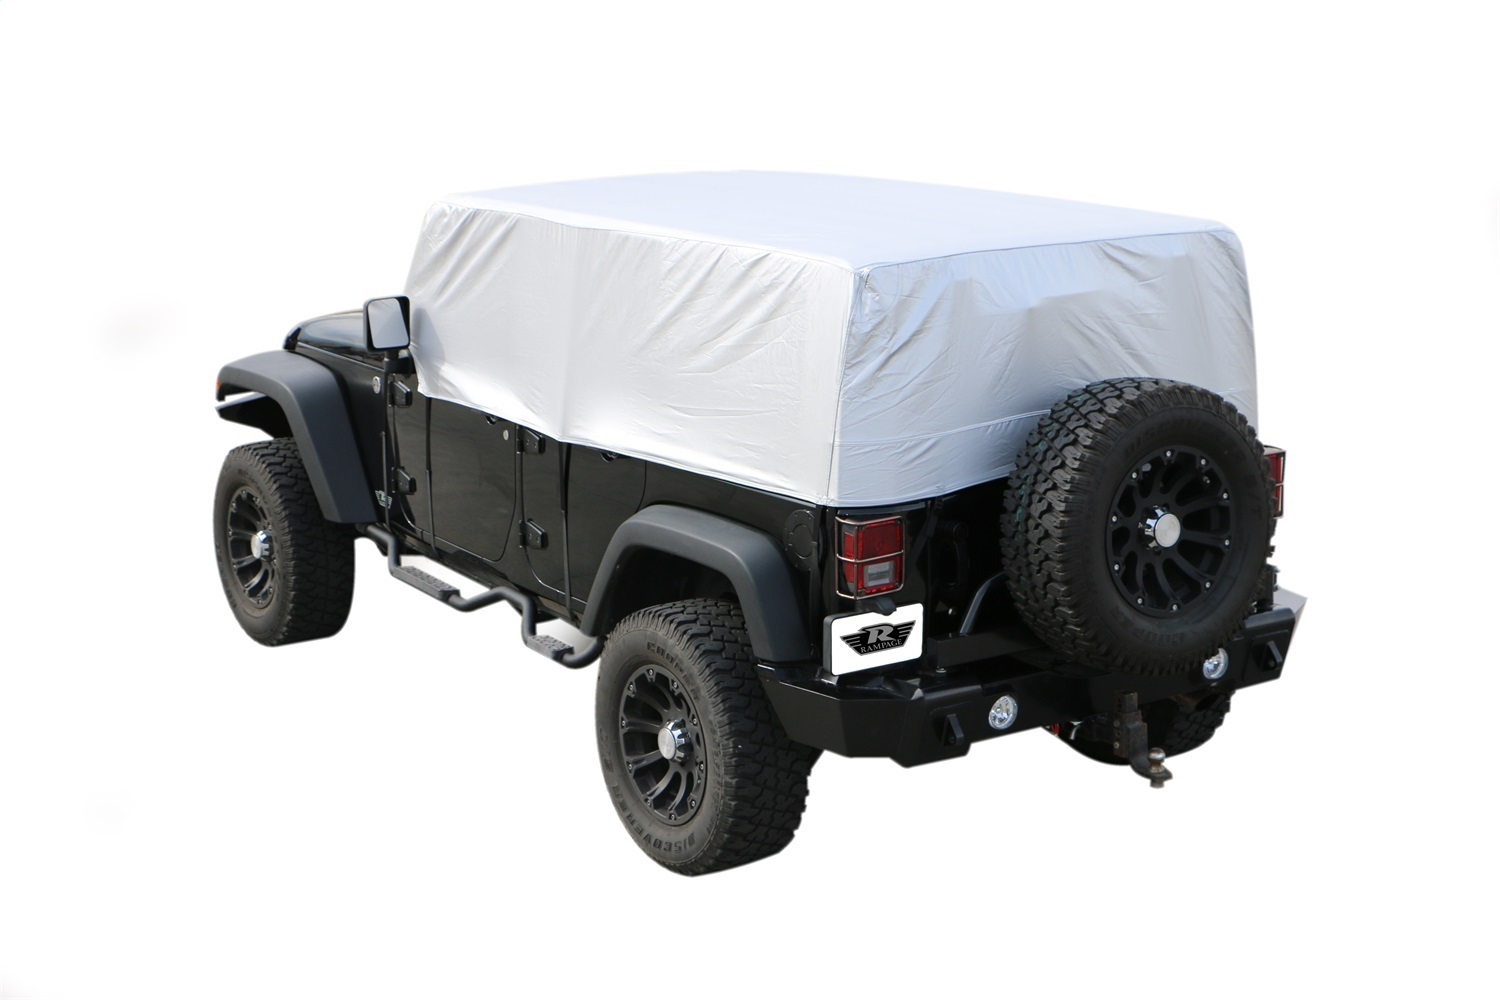 Rampage Rampage 2264 Cab Cover Fits 07-15 Wrangler (JK)